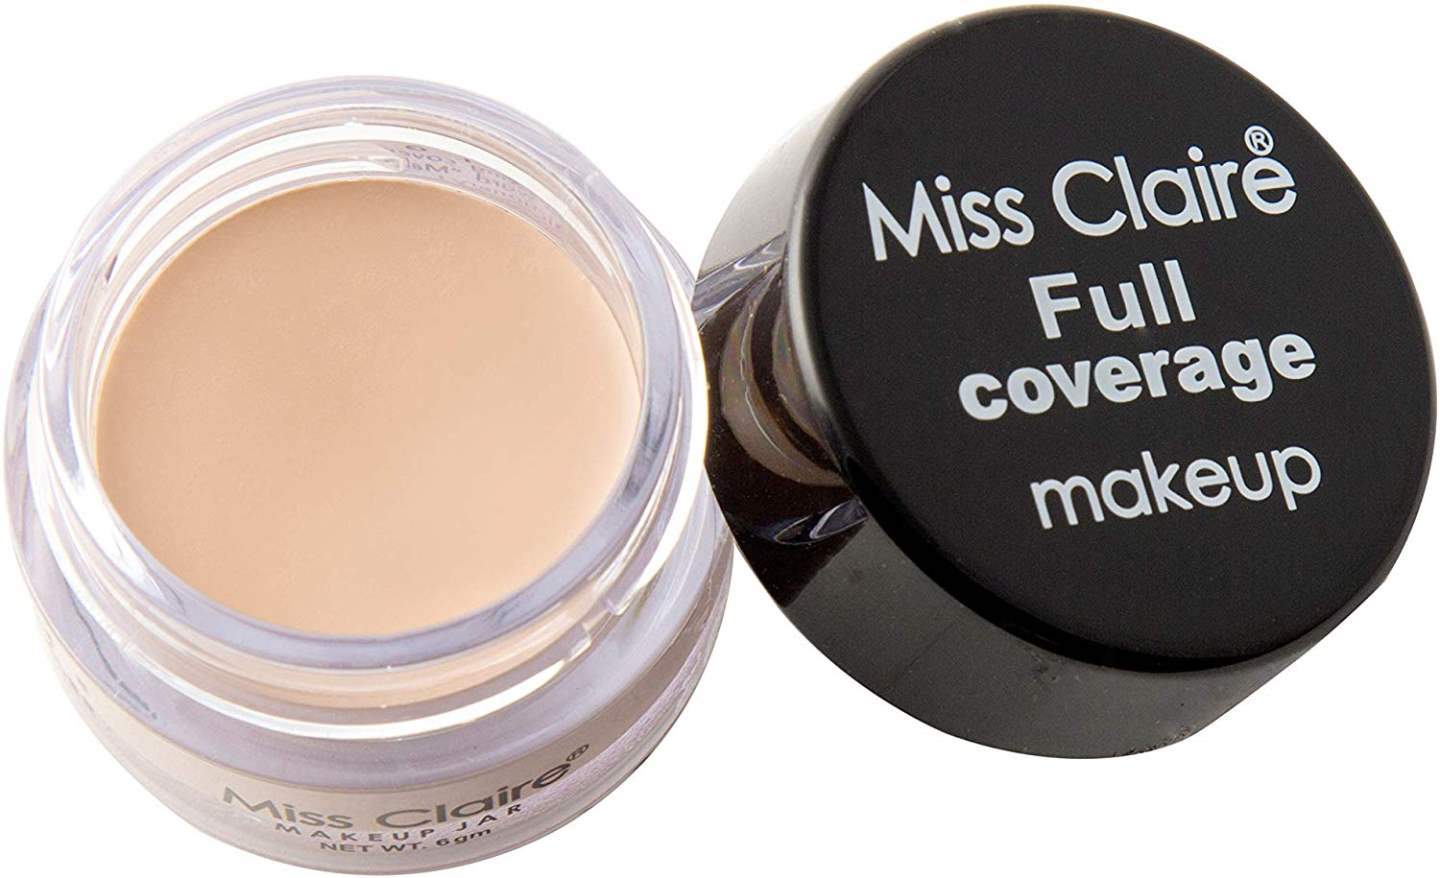 Miss Claire Full Coverage Makeup + Concealer #3, Beige - 6 g